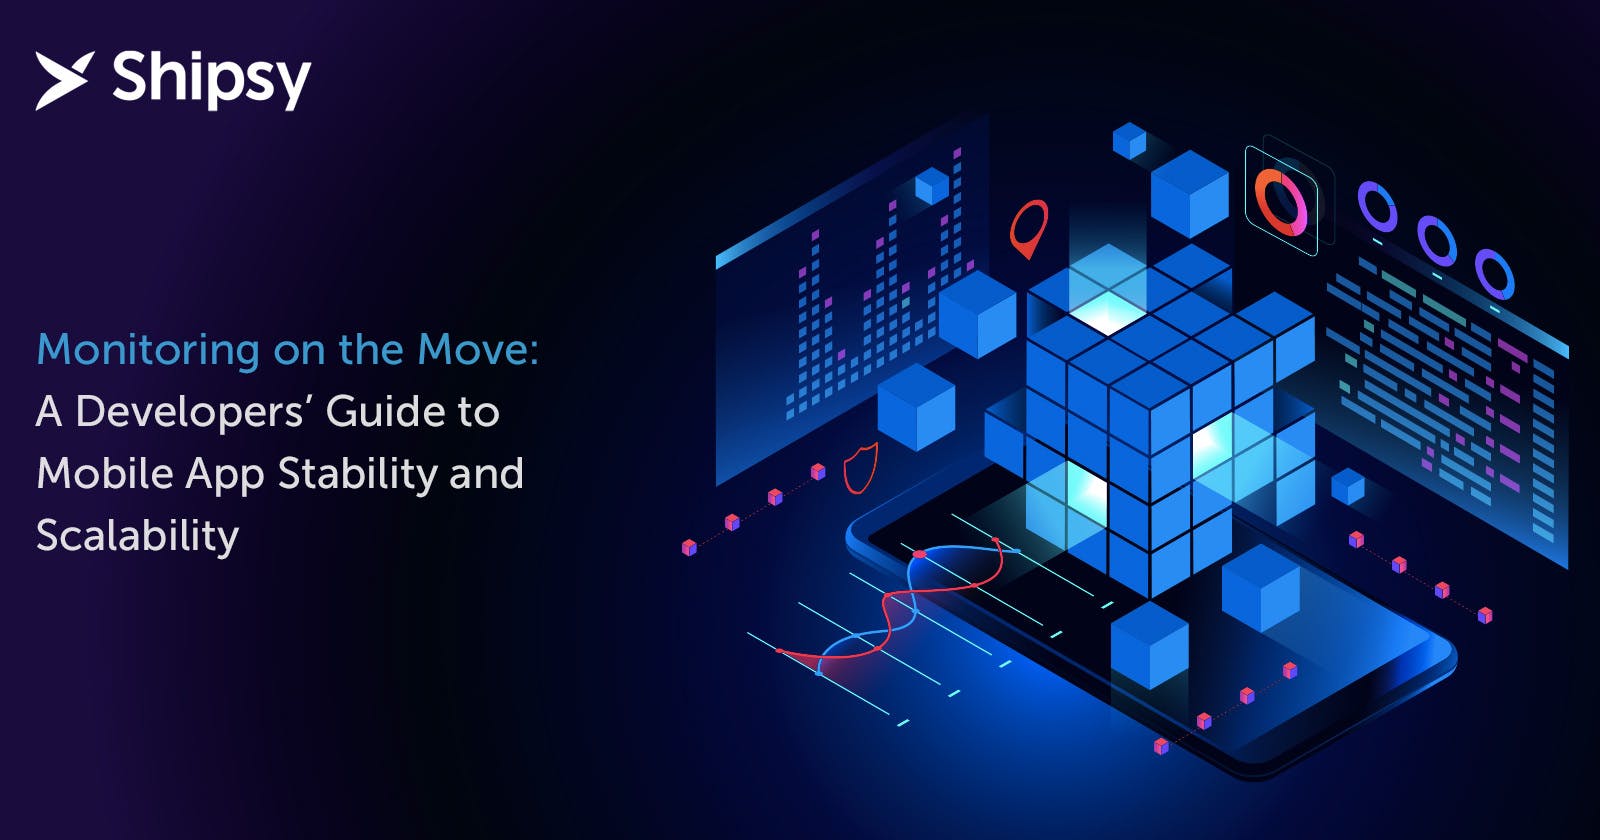 Monitoring on the Move: A Developers' Guide to Mobile App Stability and Scalability